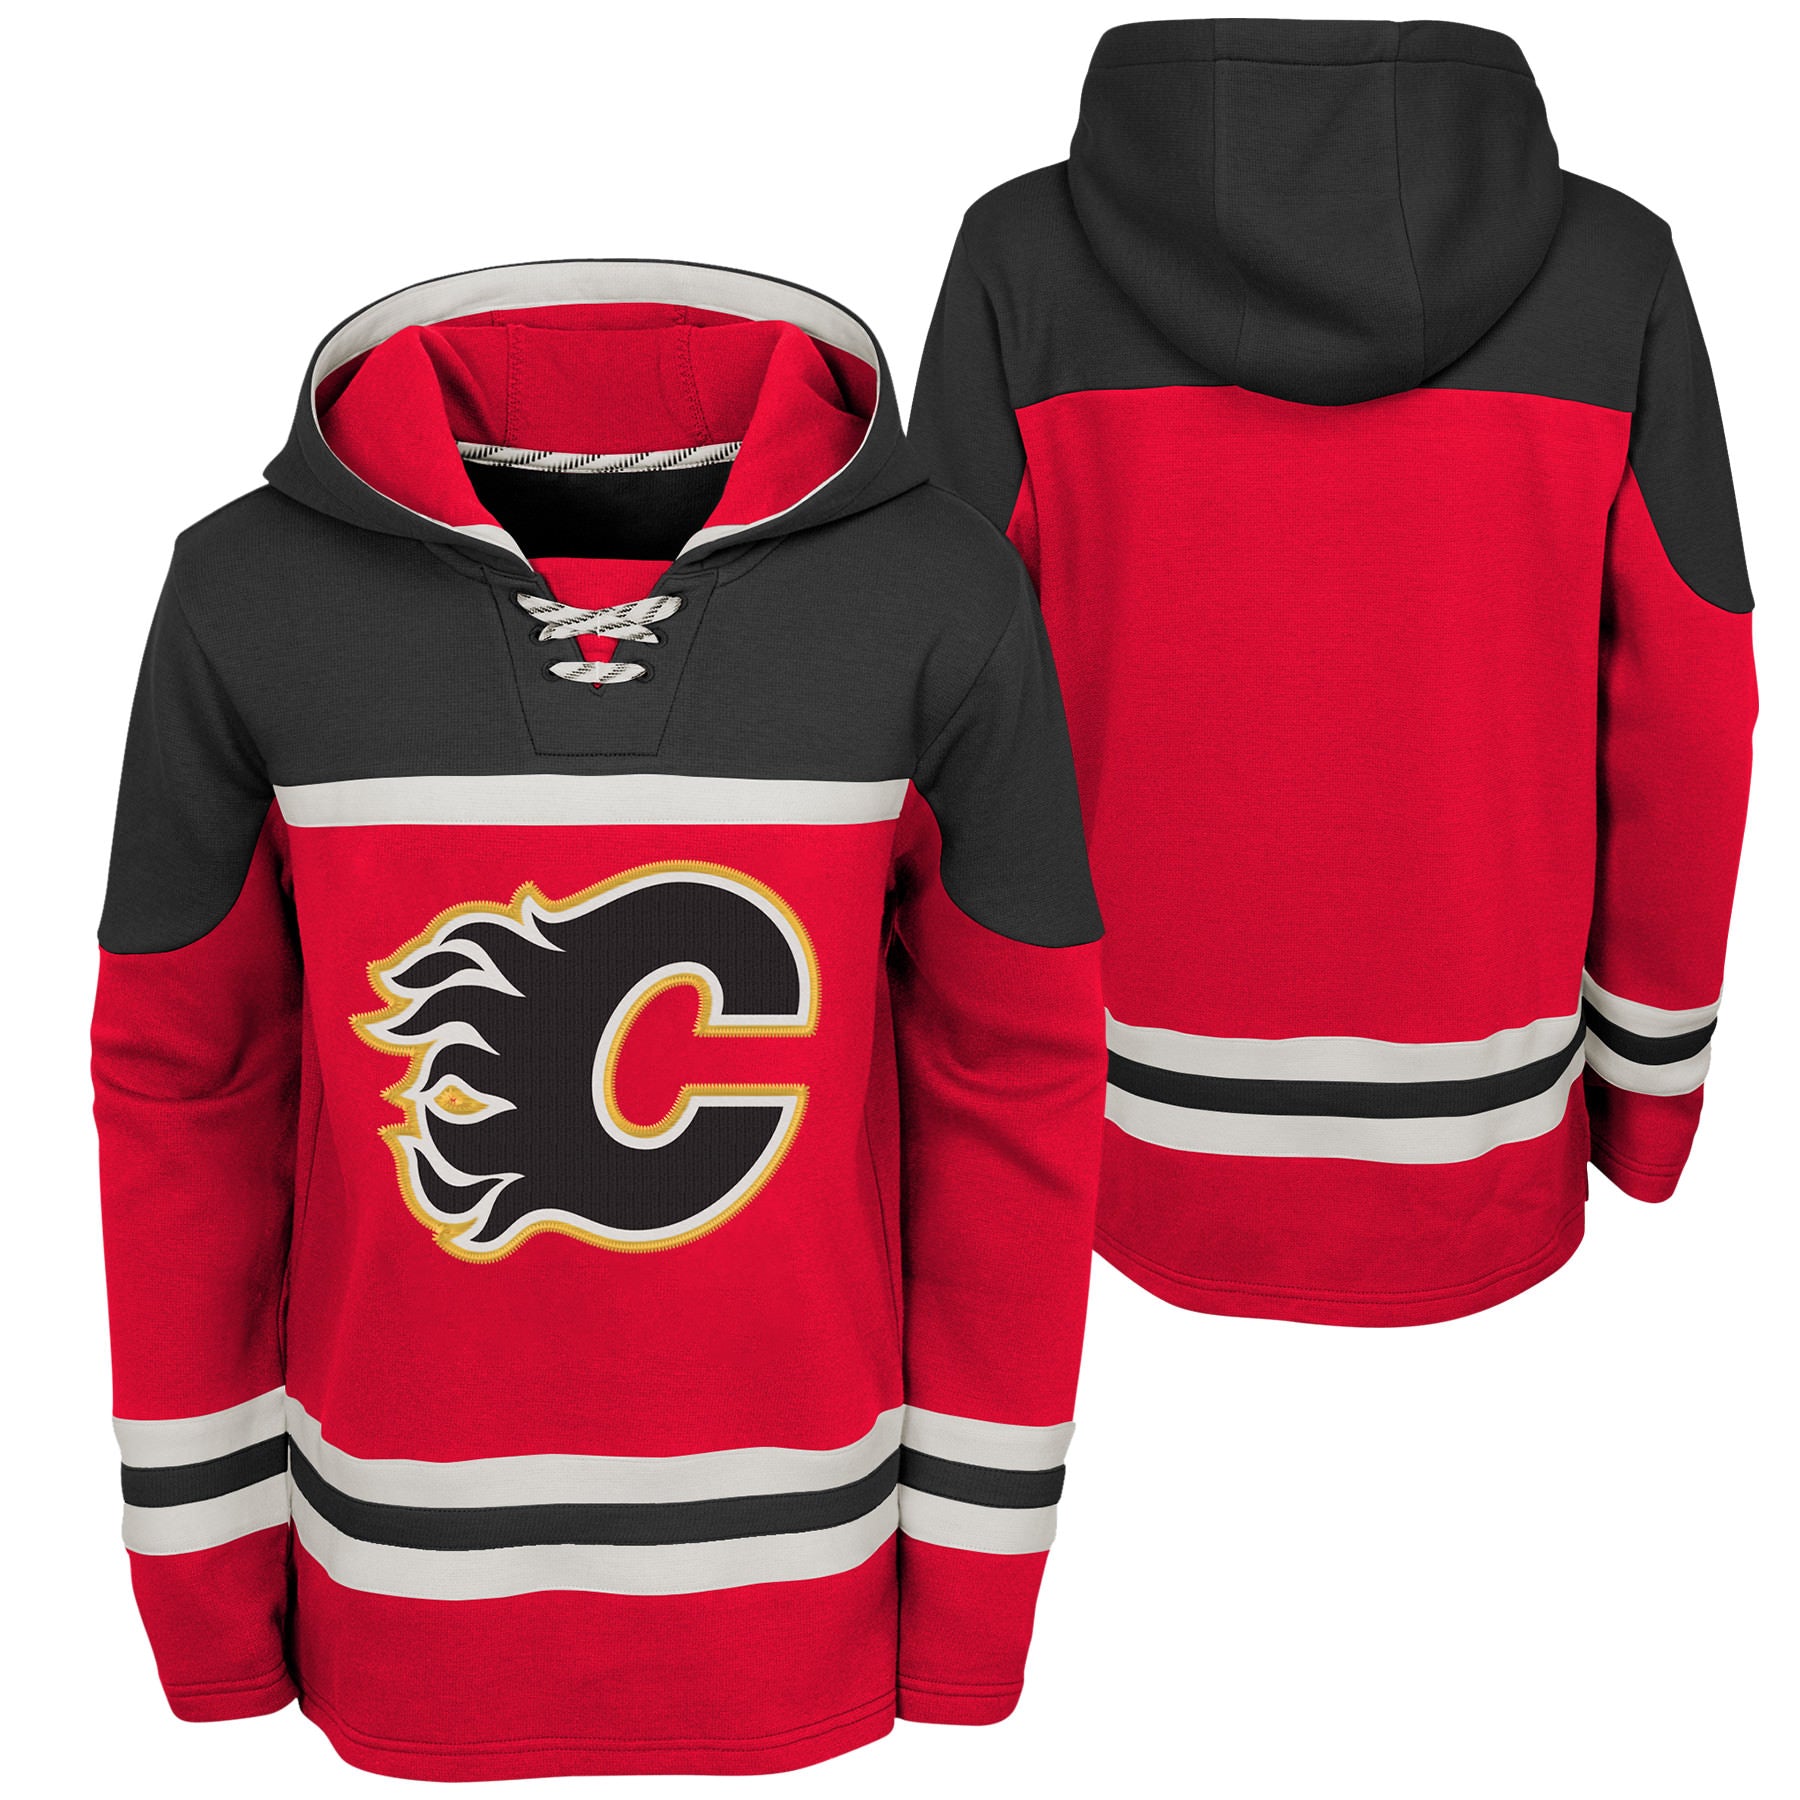 NHL Youth Calgary Flames Stated Red Full-Zip Hoodie, Size: Large